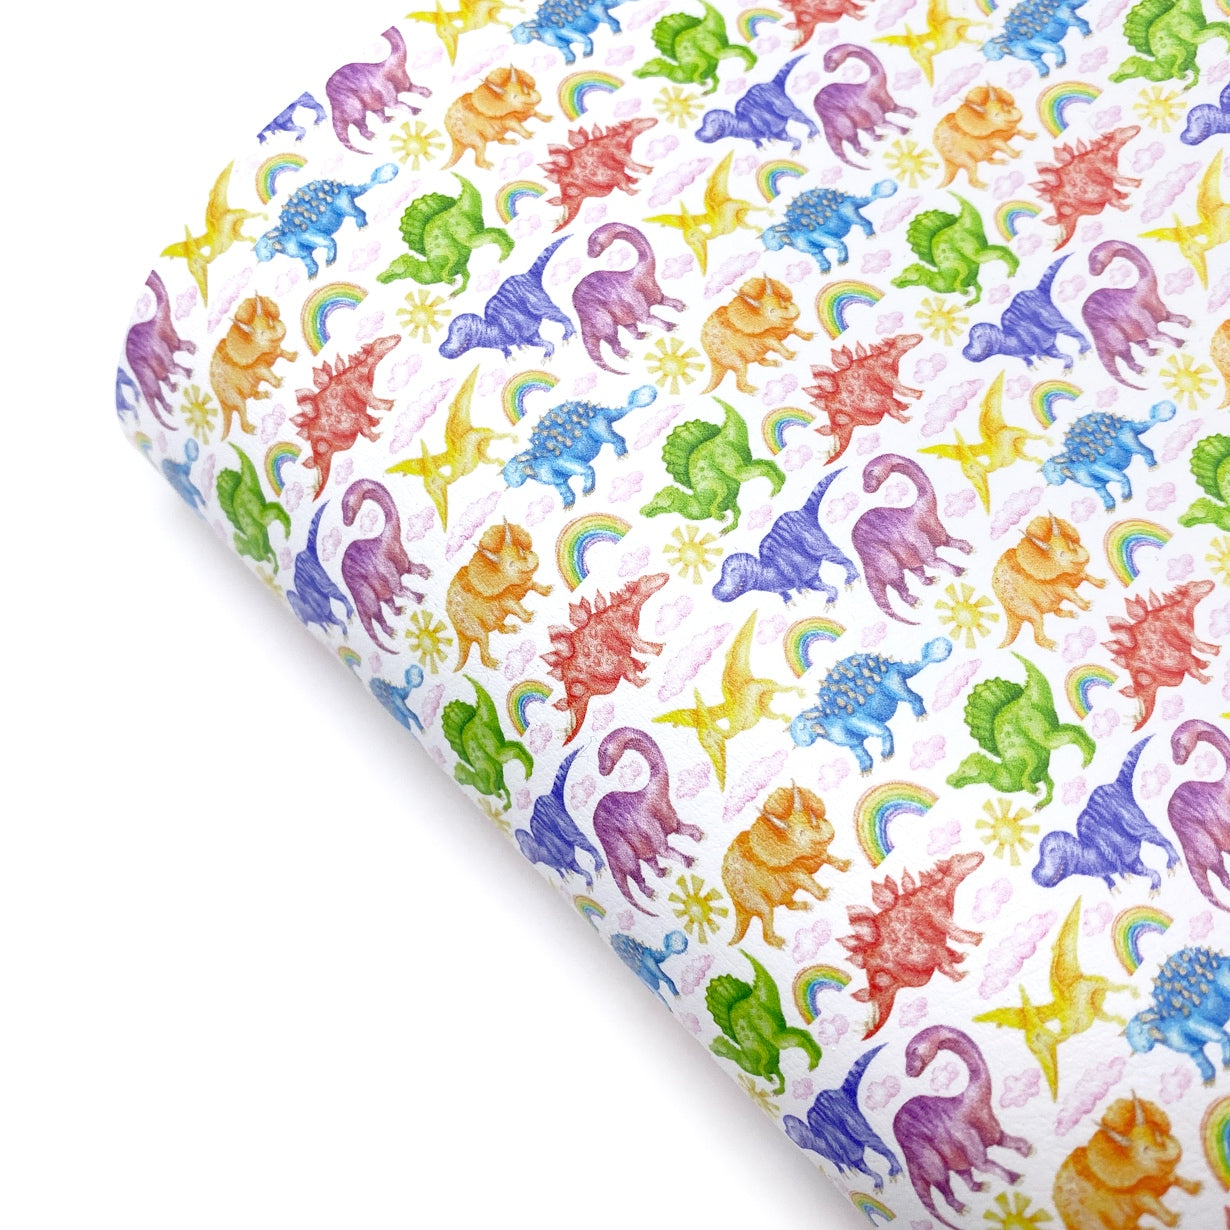 Rainbow Dinosaurs Premium Faux Leather Fabric Sheets